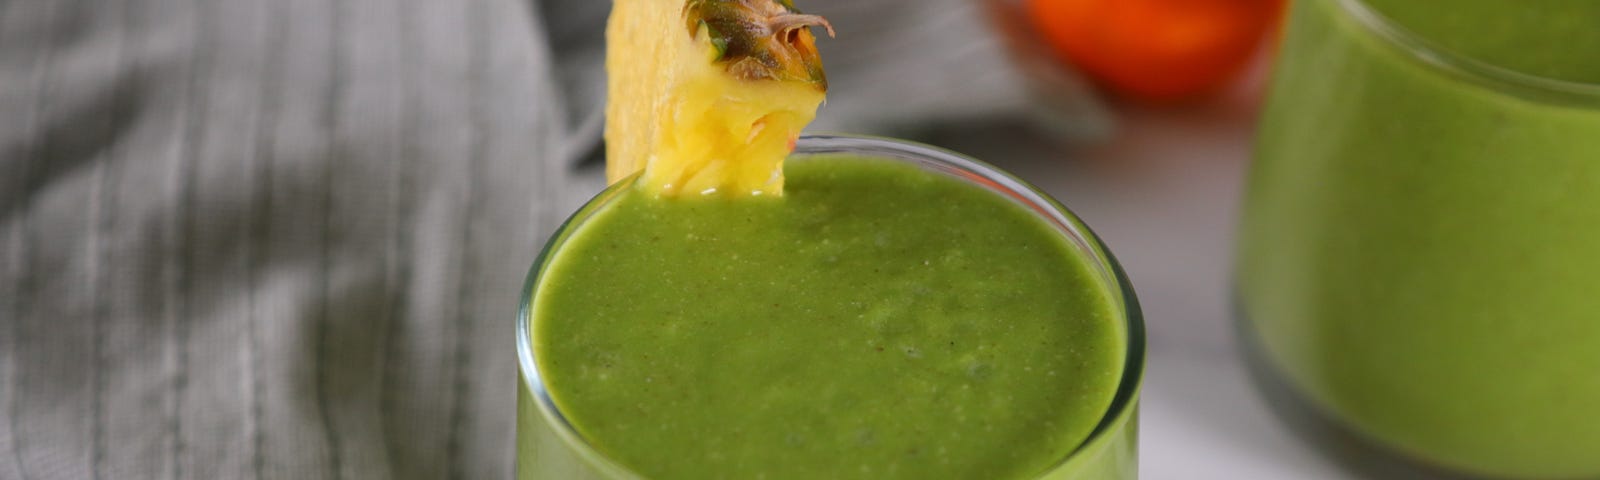 Tropical green smoothie in a glass with pineapple